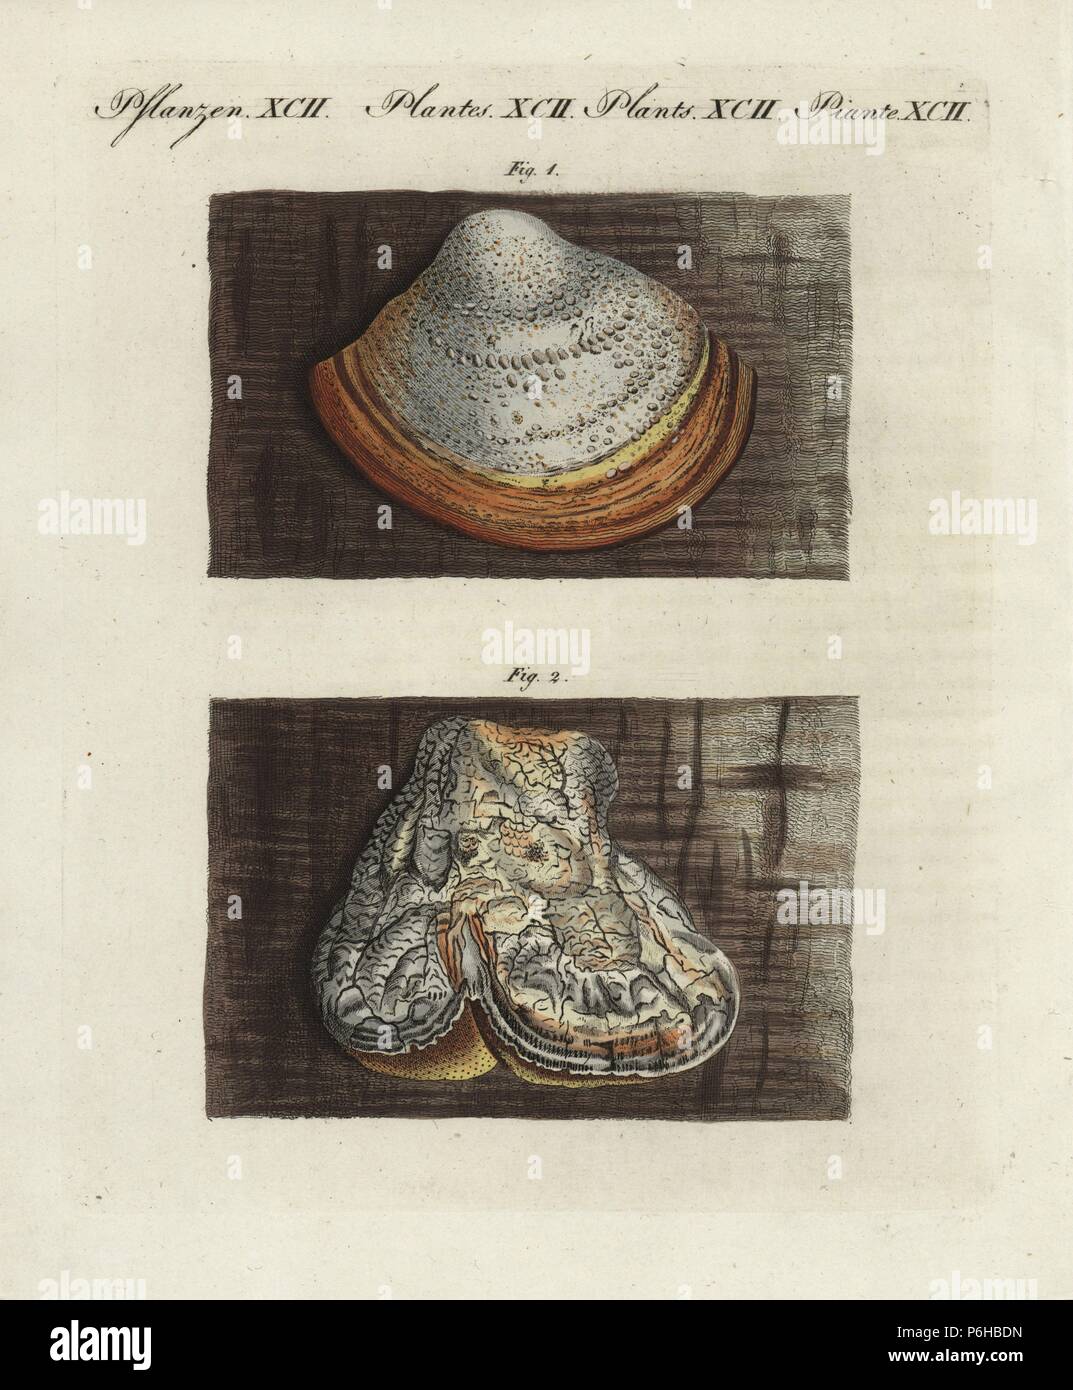 Phellinus igniarius (Boletus igniarius) and agarikon, Laricifomes officinalis (Boletus laricis). Handcoloured copperplate engraving from Bertuch's 'Bilderbuch fur Kinder' (Picture Book for Children), Weimar, 1805. Friedrich Johann Bertuch (1747-1822) was a German publisher and man of arts most famous for his 12-volume encyclopedia for children illustrated with 1,200 engraved plates on natural history, science, costume, mythology, etc., published from 1790-1830. Stock Photo